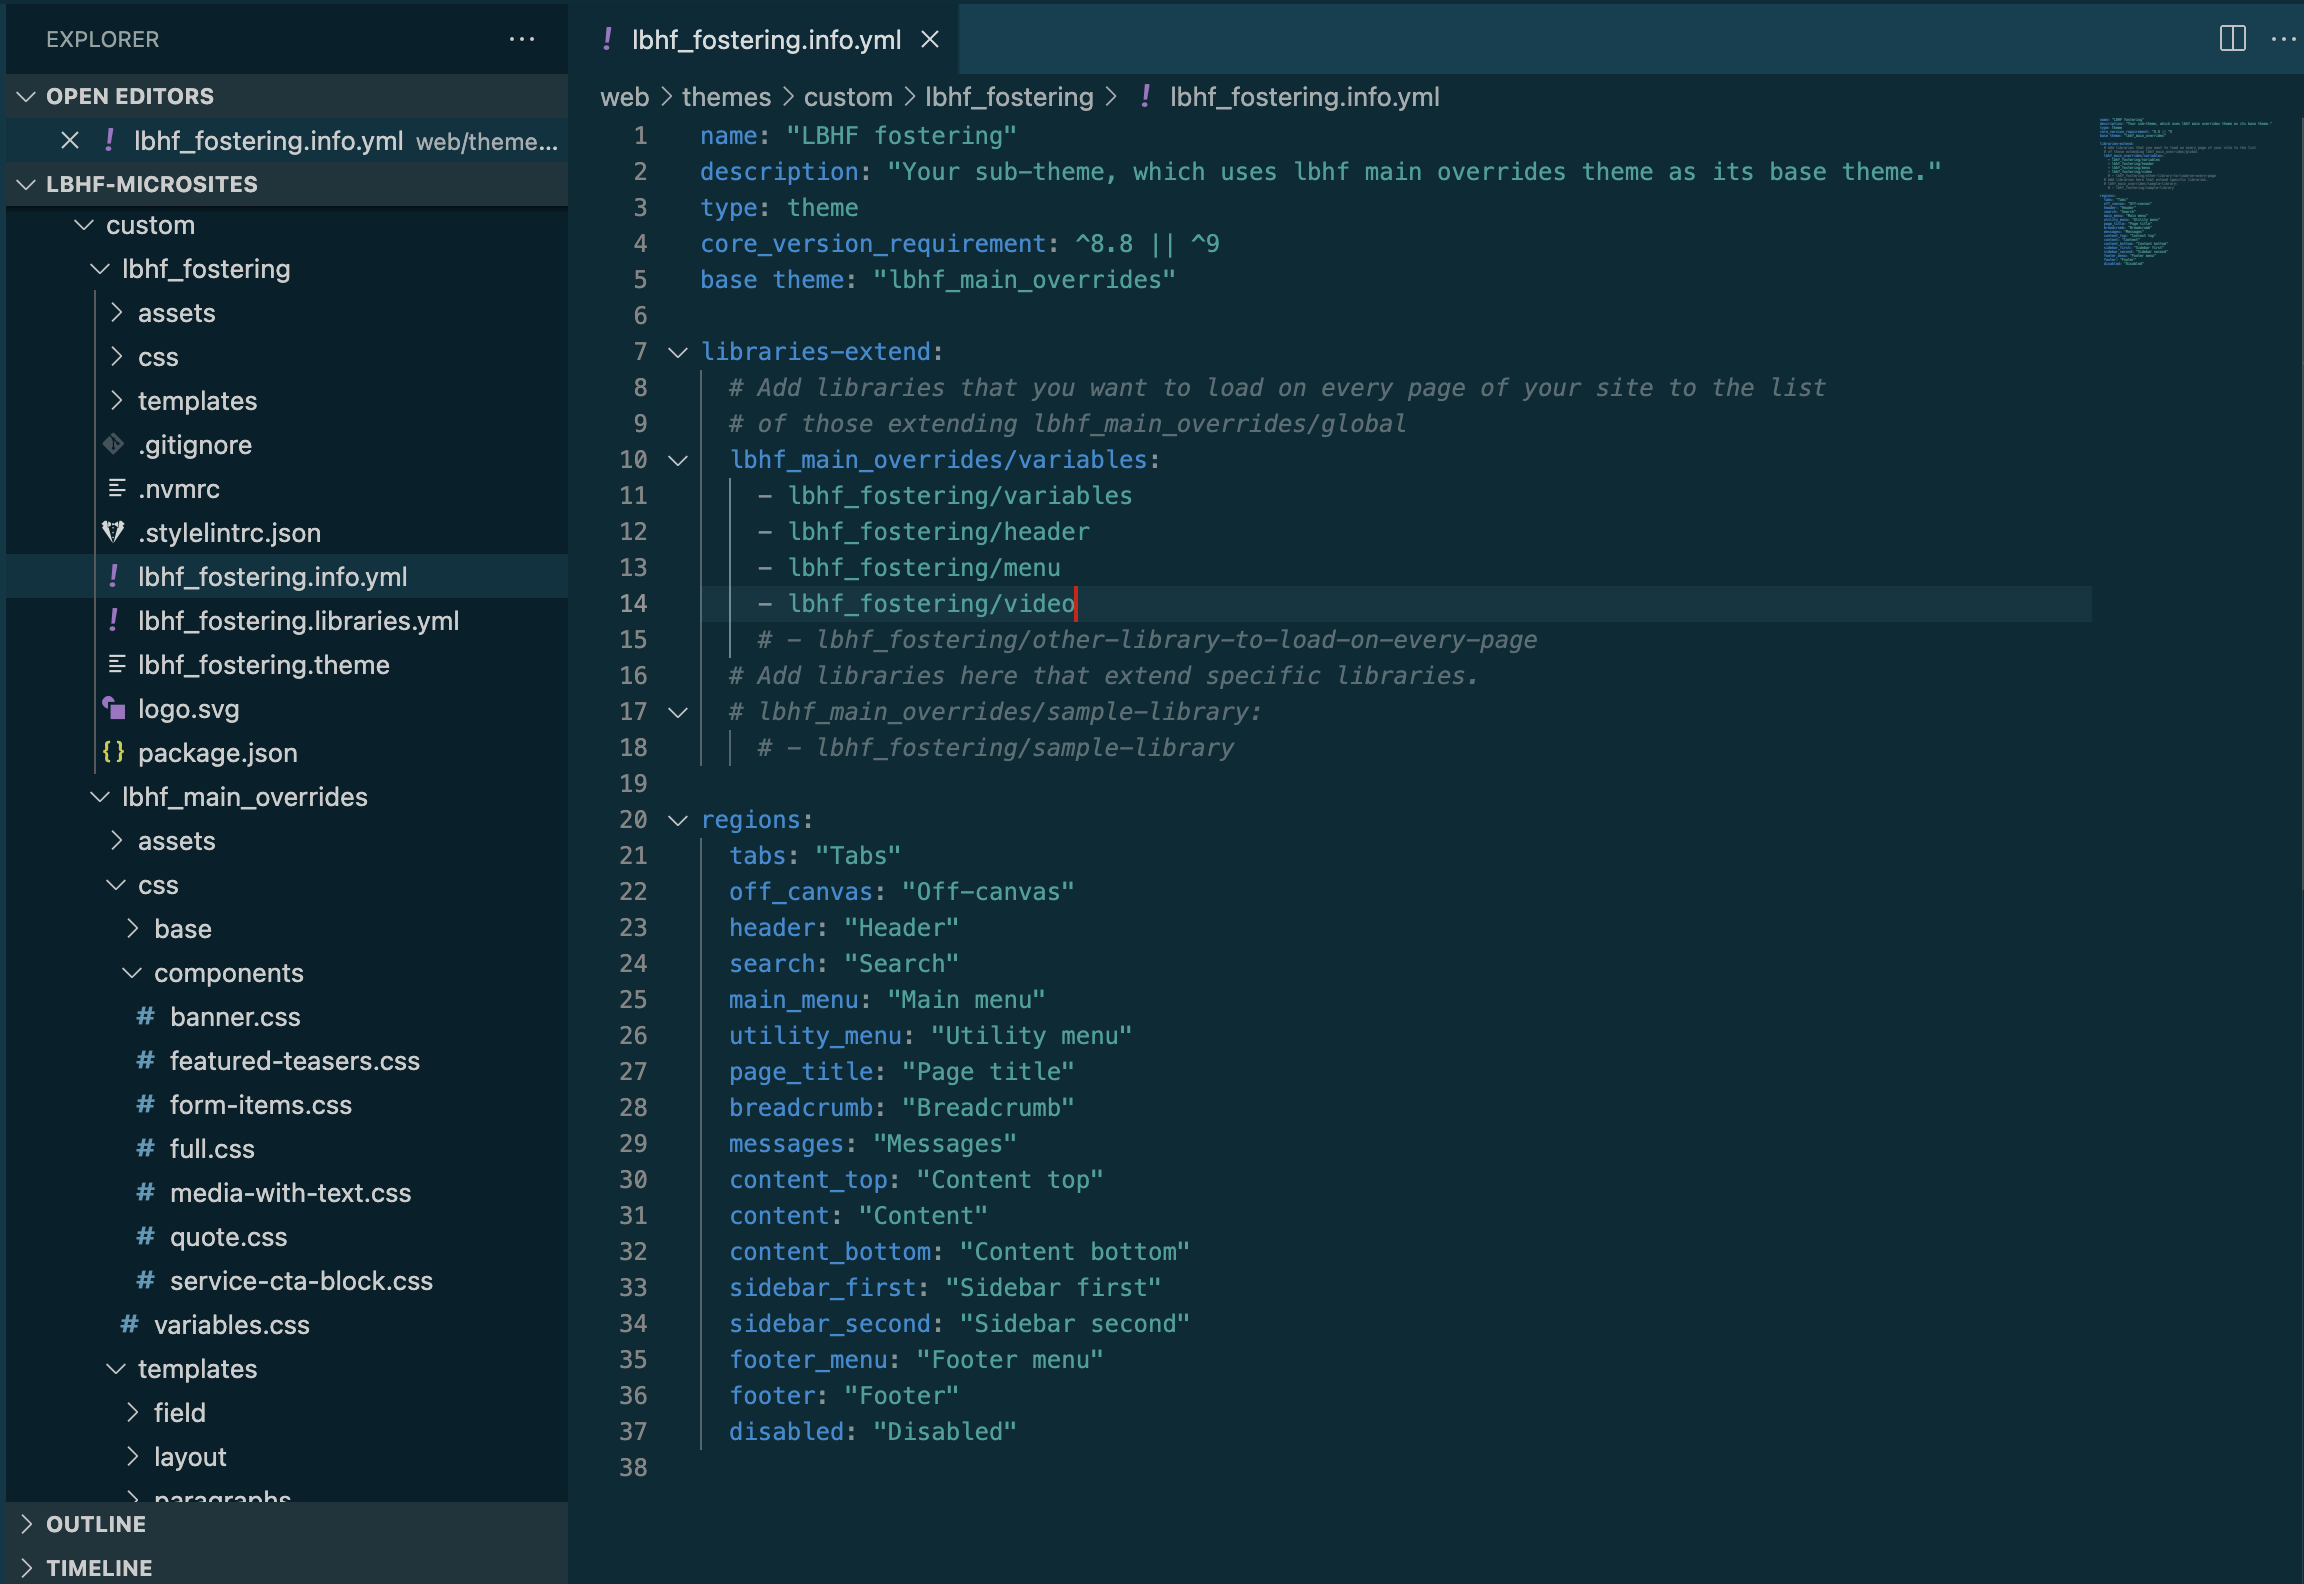 A screenshot of the codebase, showing a theme using another theme as a base theme